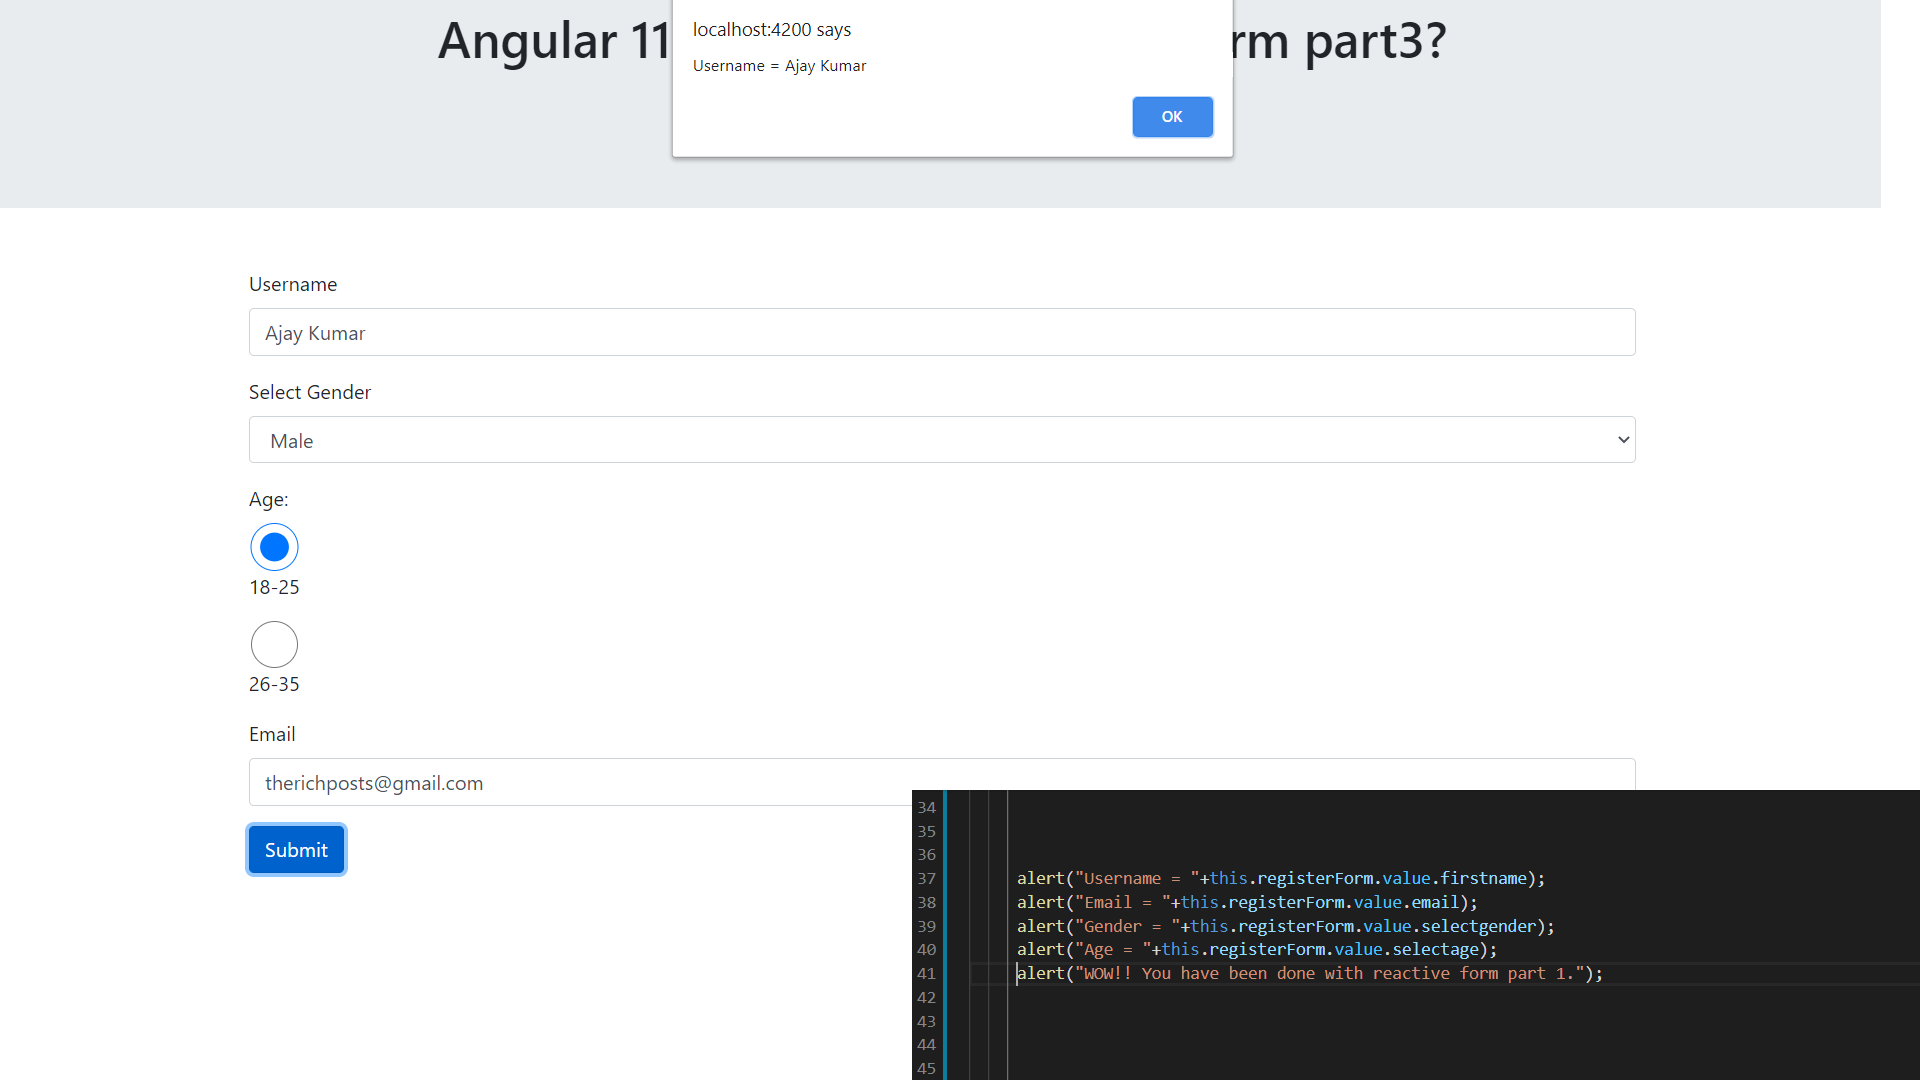 Angular 11 - How use to reactive form part 3? Getting Data